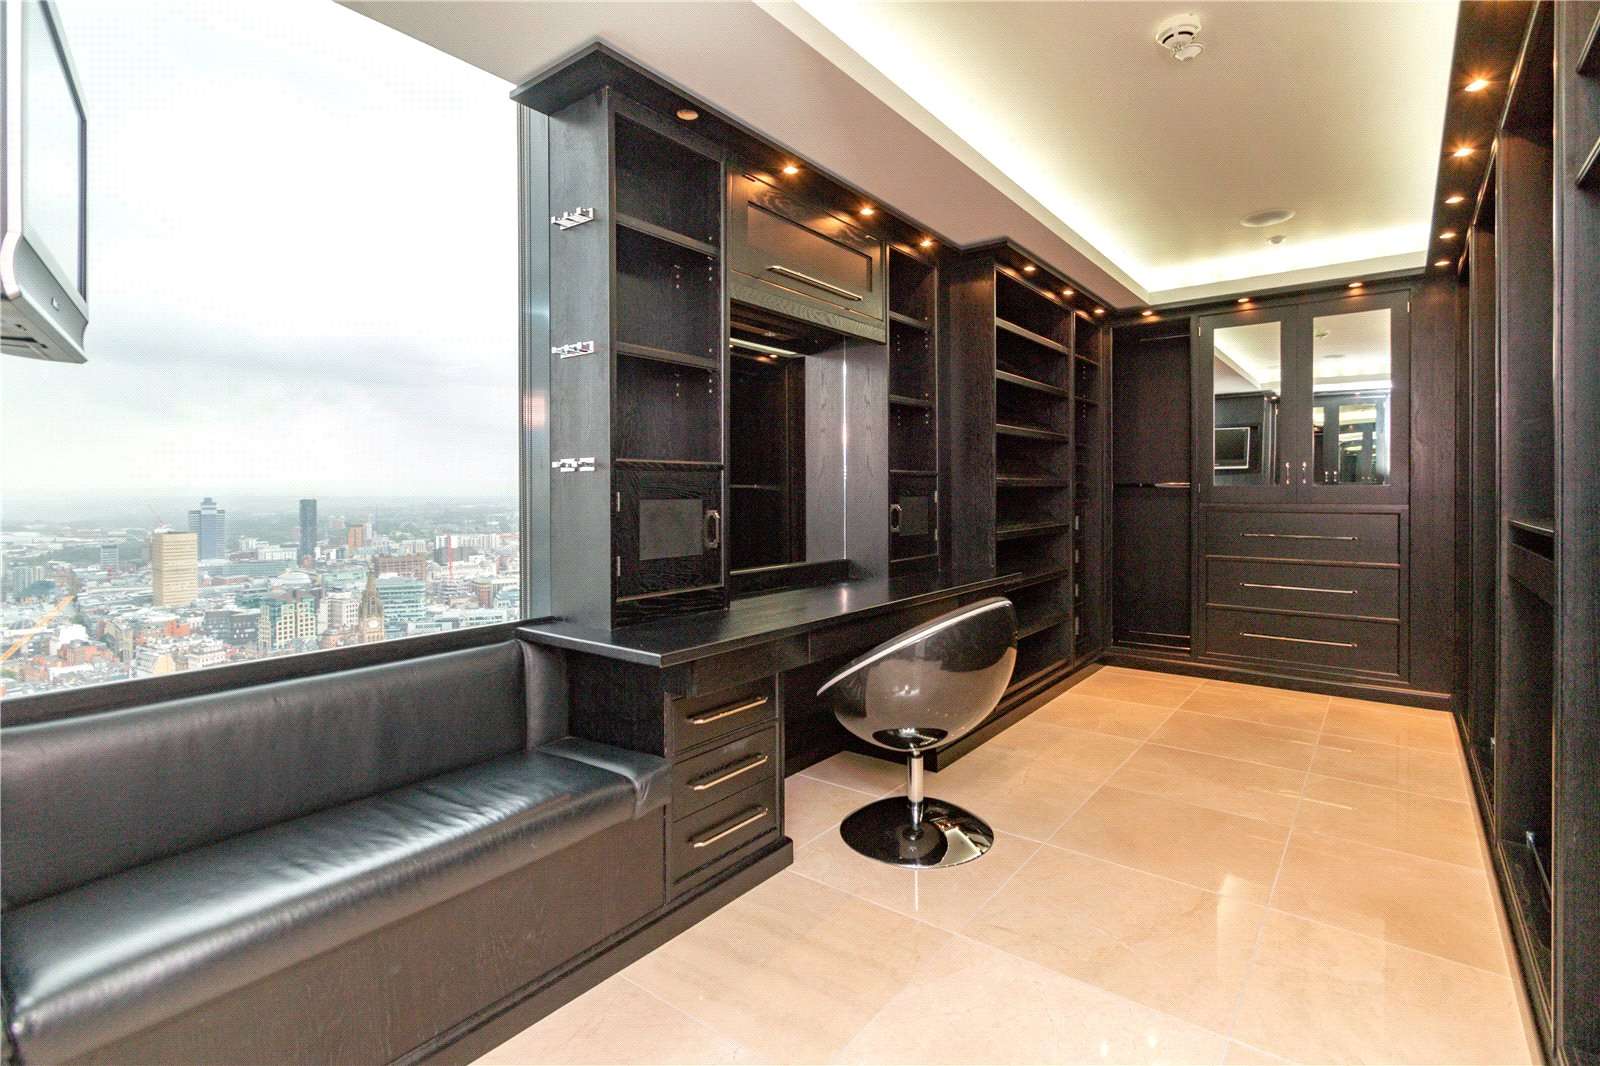 Inside the luxury Beetham Tower flat with rental price of £22k a MONTH, The Manc